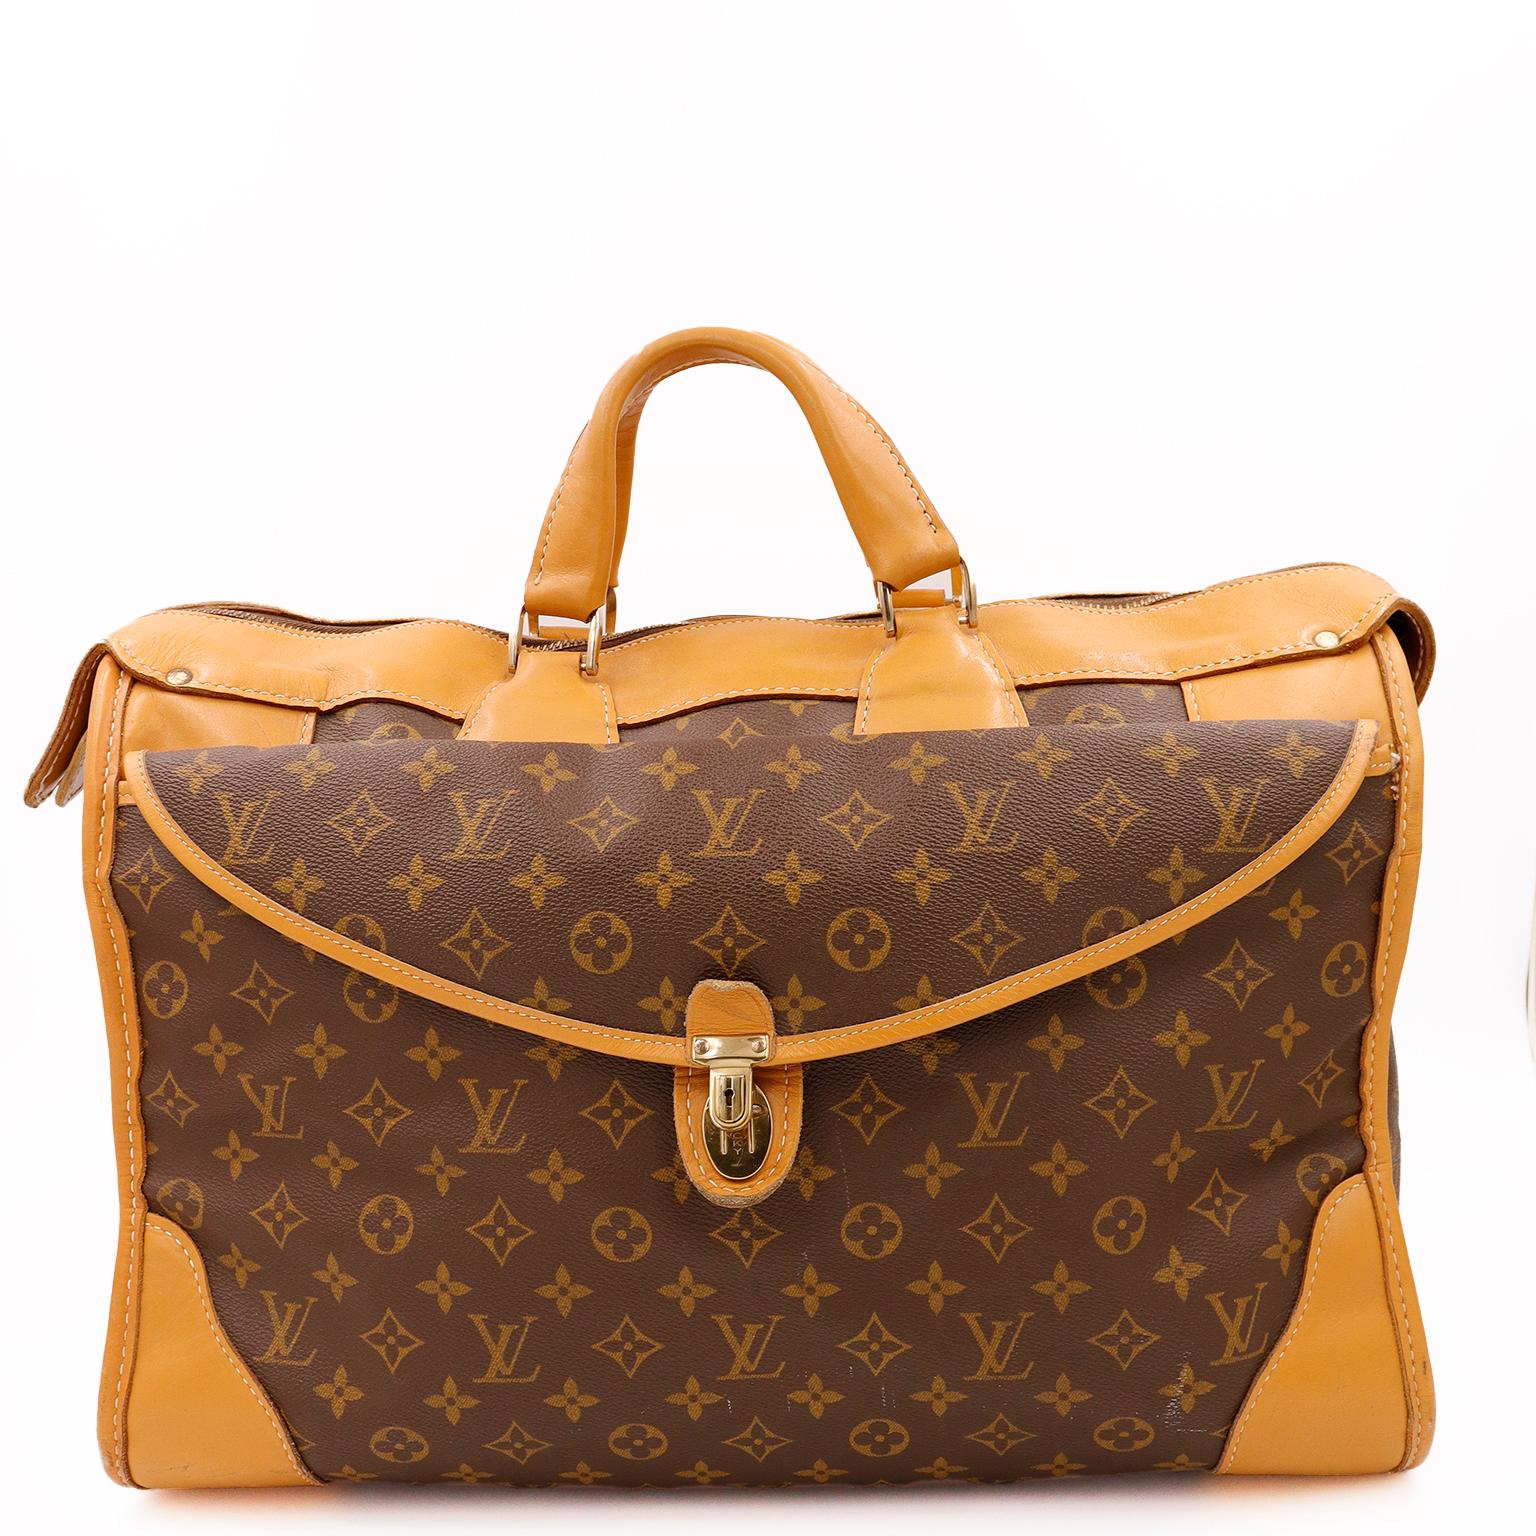 Louis Vuitton Carry All Soft Side Suitcase Weekender Luggage French Company  70s at 1stDibs